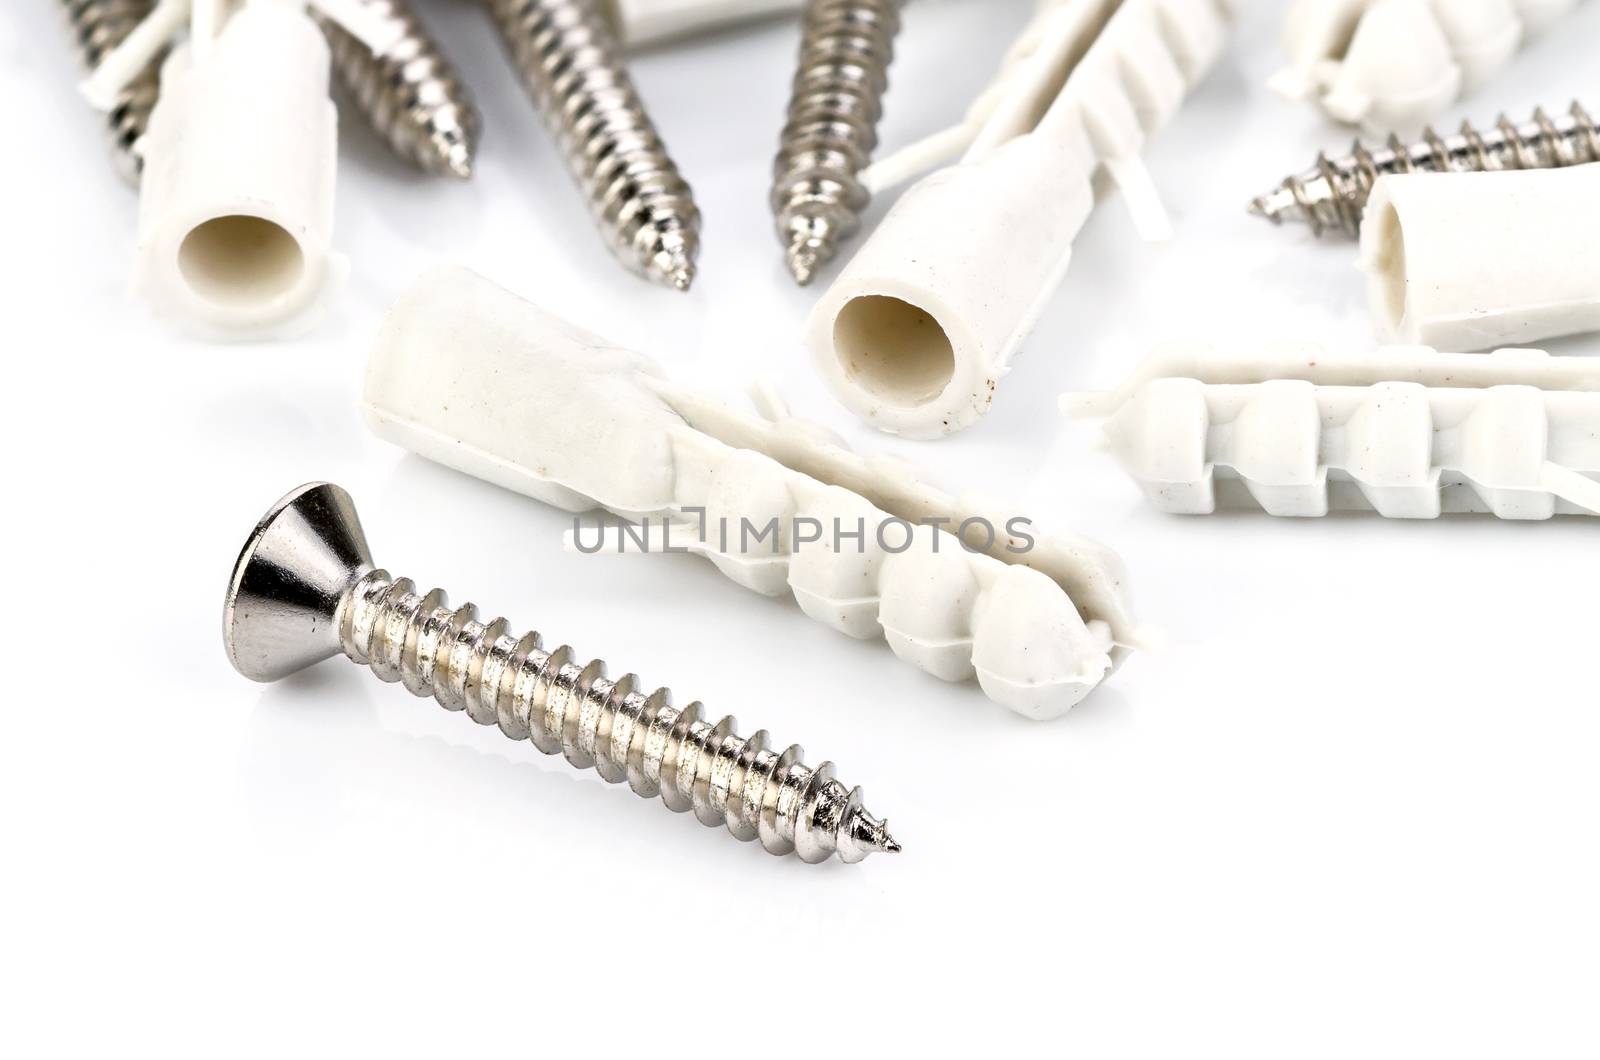 Stainless steel screw and plastic dowel on white background